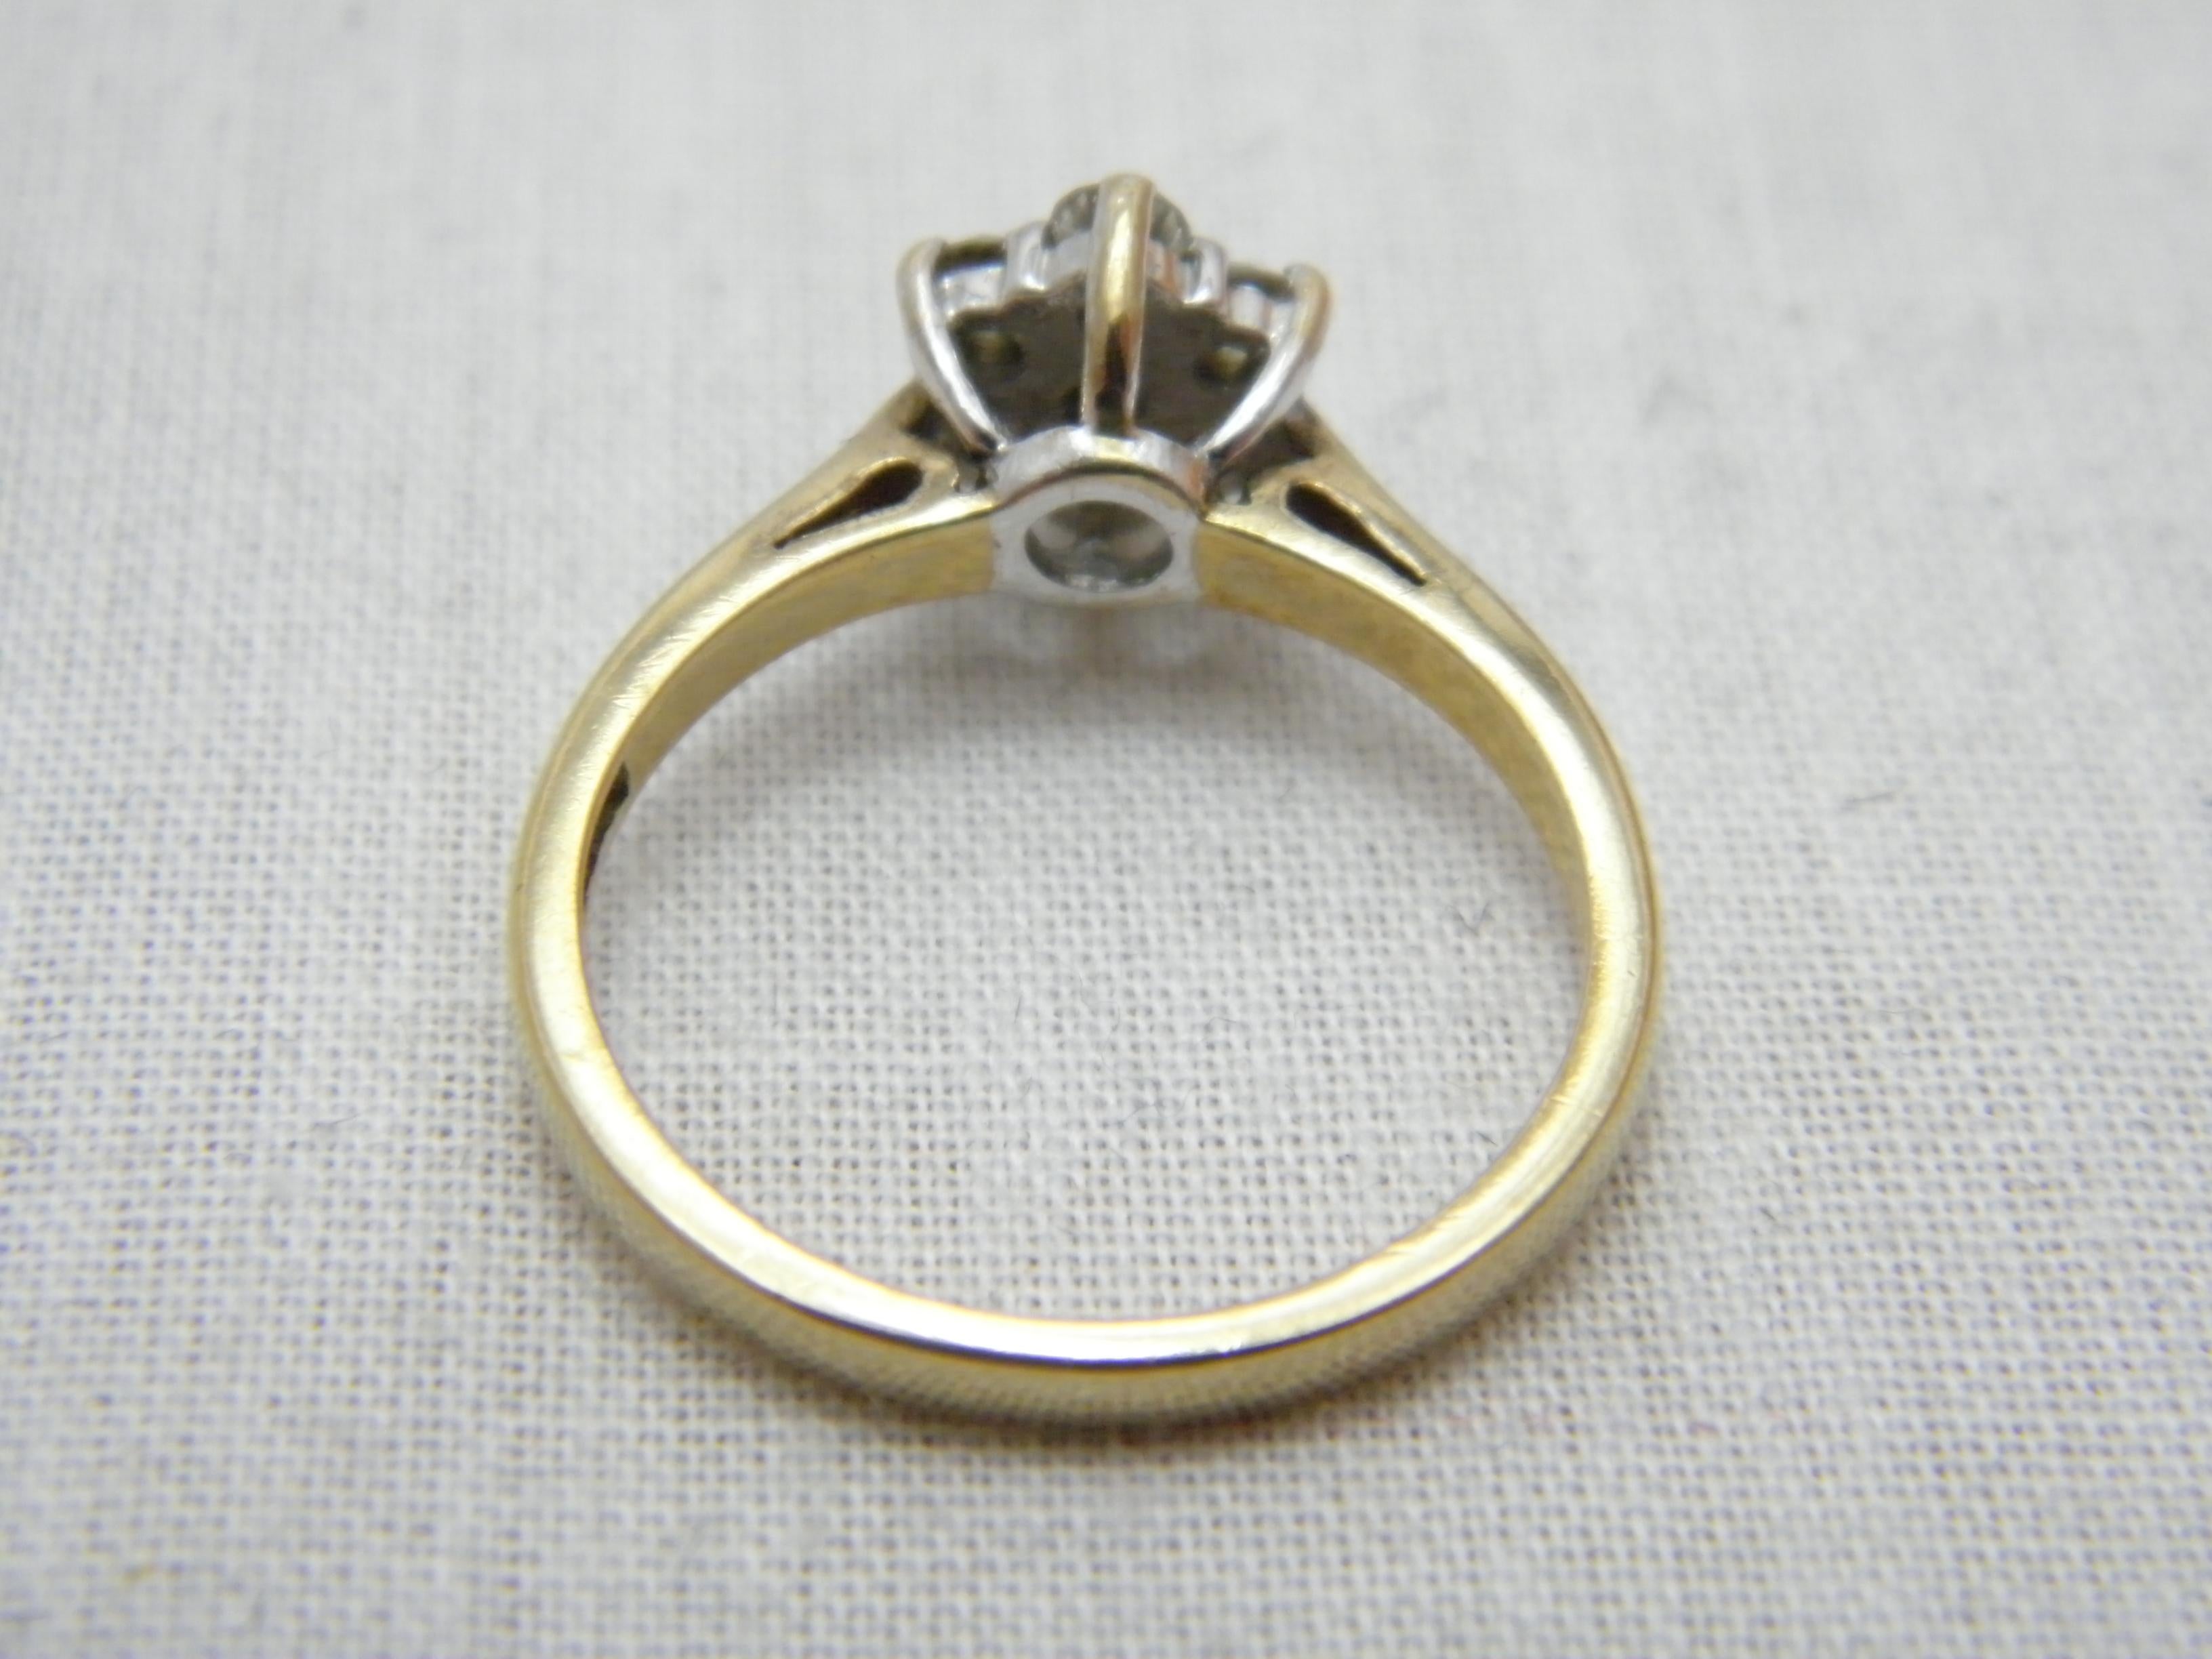 Round Cut Vintage 9ct Gold 0.5Cttw Diamond Daisy Cluster Engagement Ring Size N 6.75 375 For Sale